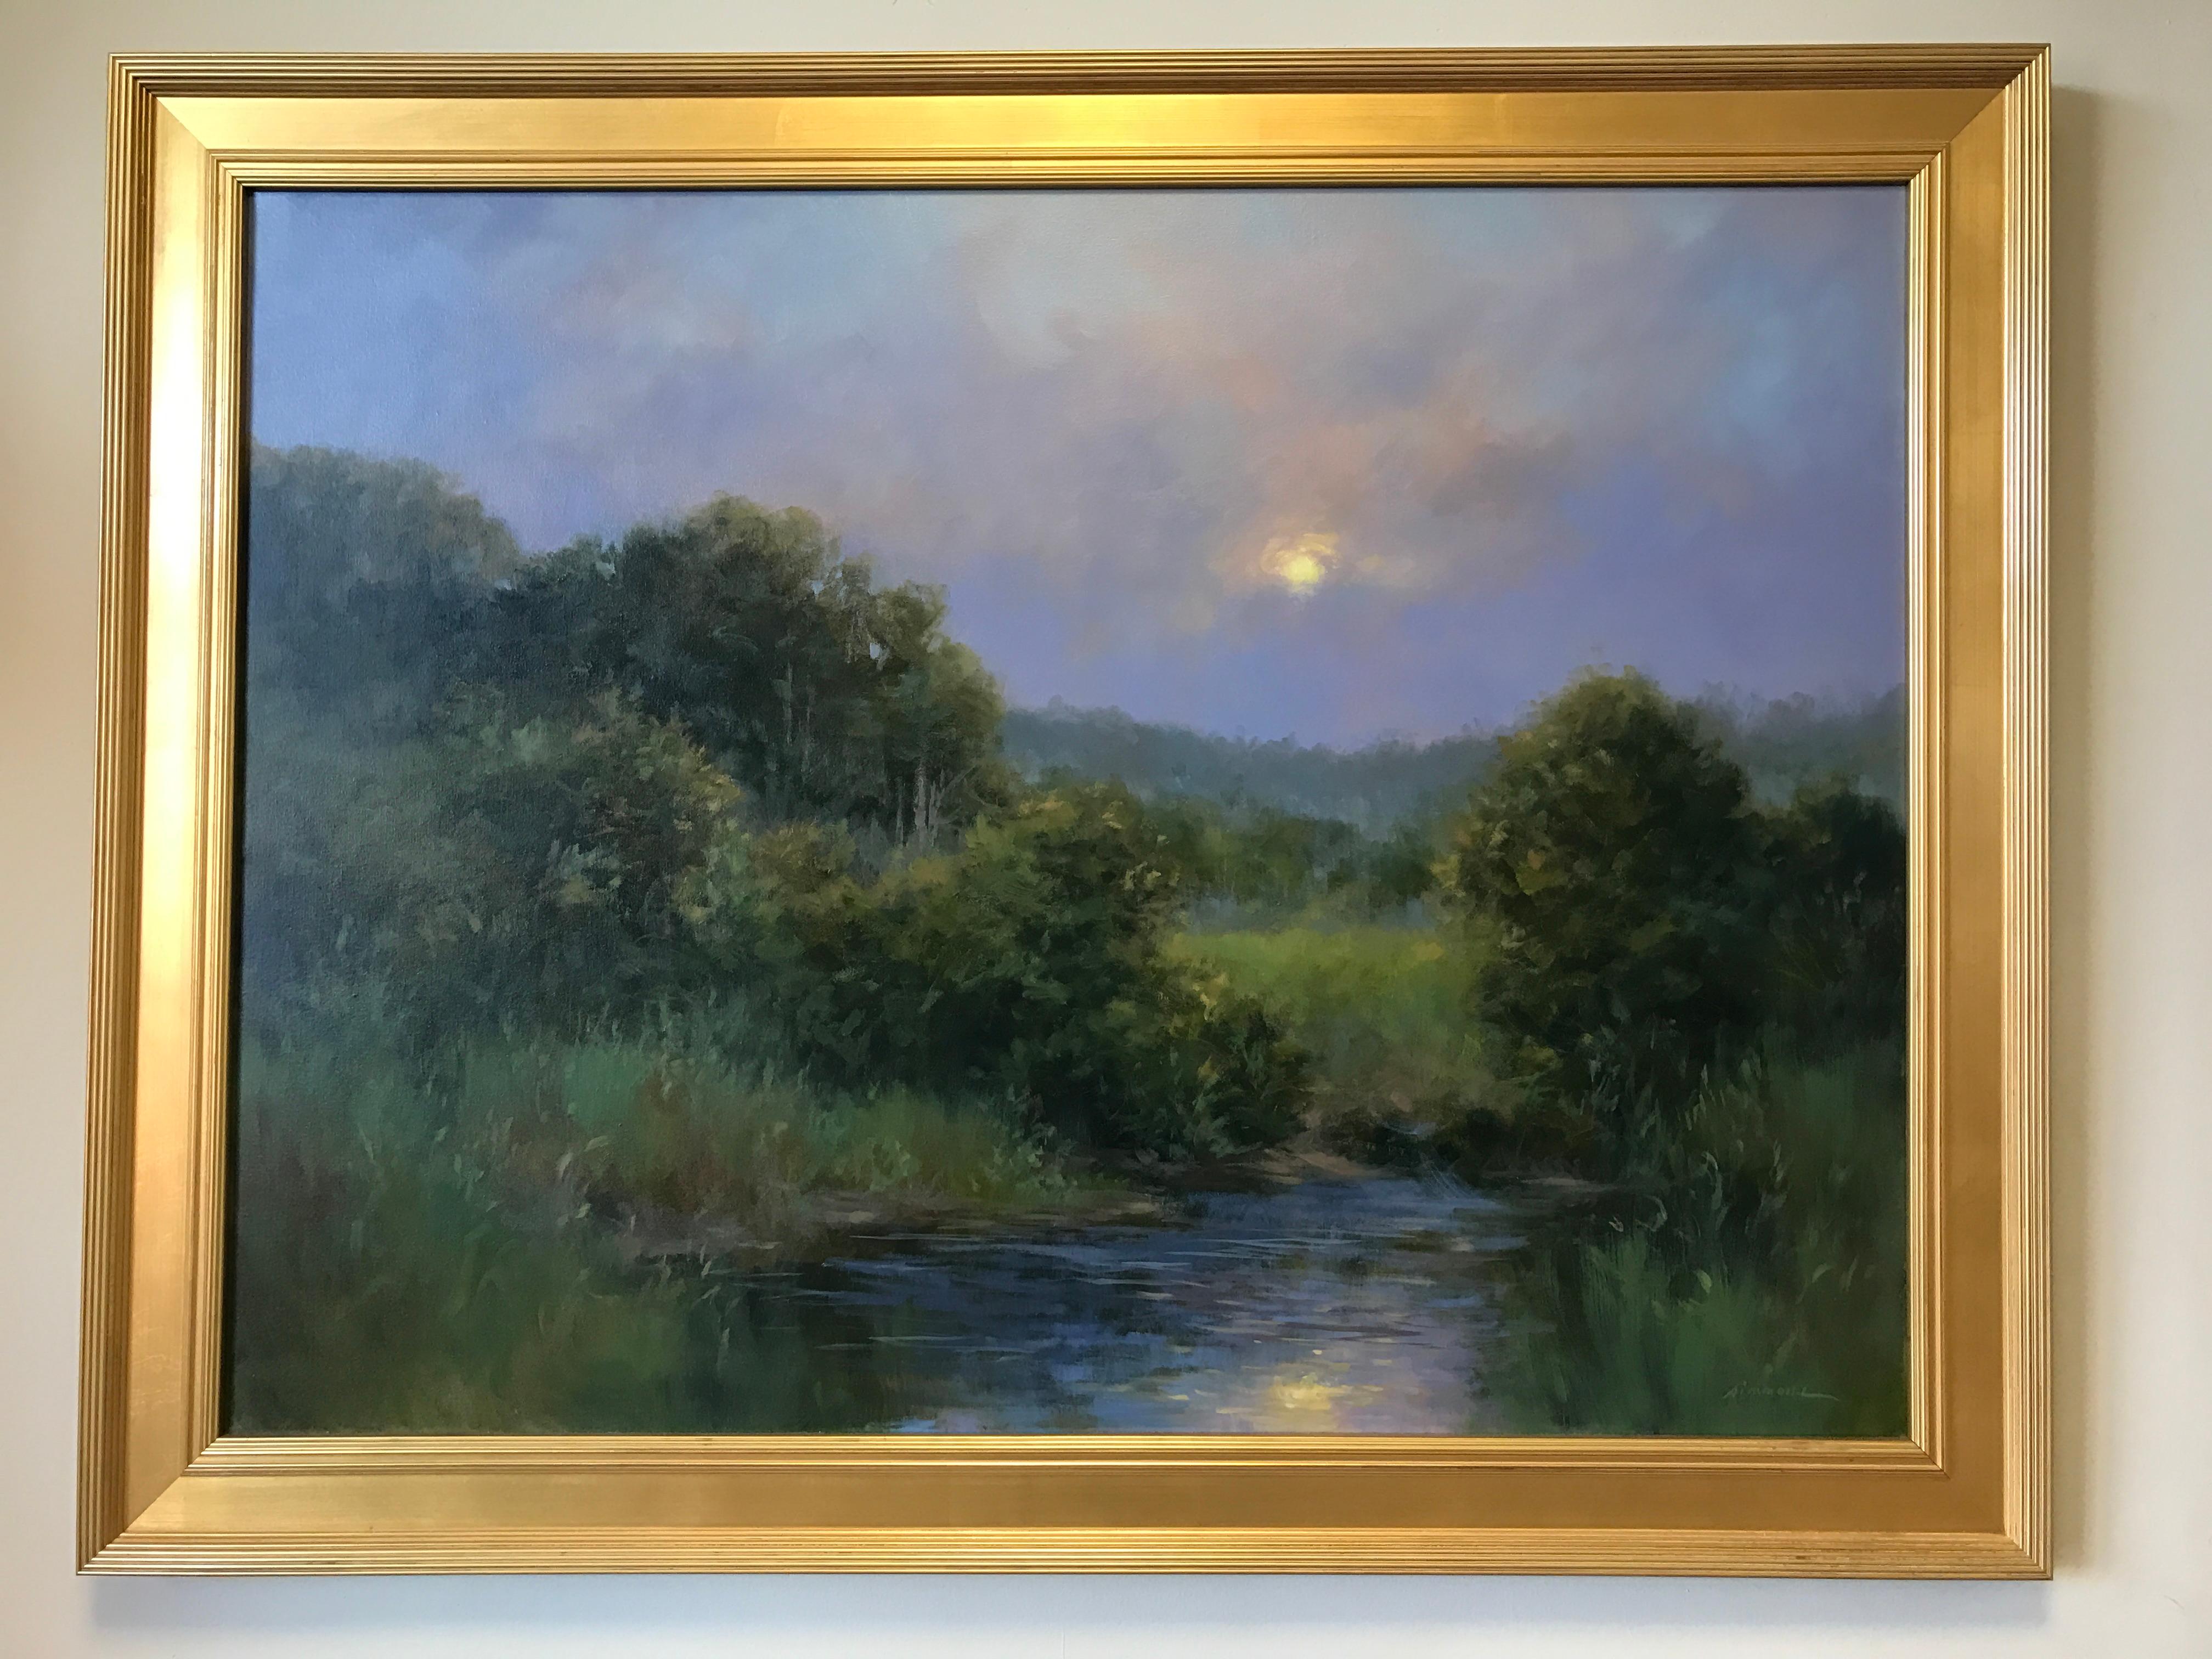 This large oil on canvas is a stunning visual interpretation of a New England sunset painted by Katherine Simmons. Signed lower right and framed in a gold gilt frame. Painting measures 30 x 40 inches. Overall dimensions are 35.5 x 45.5 inches.